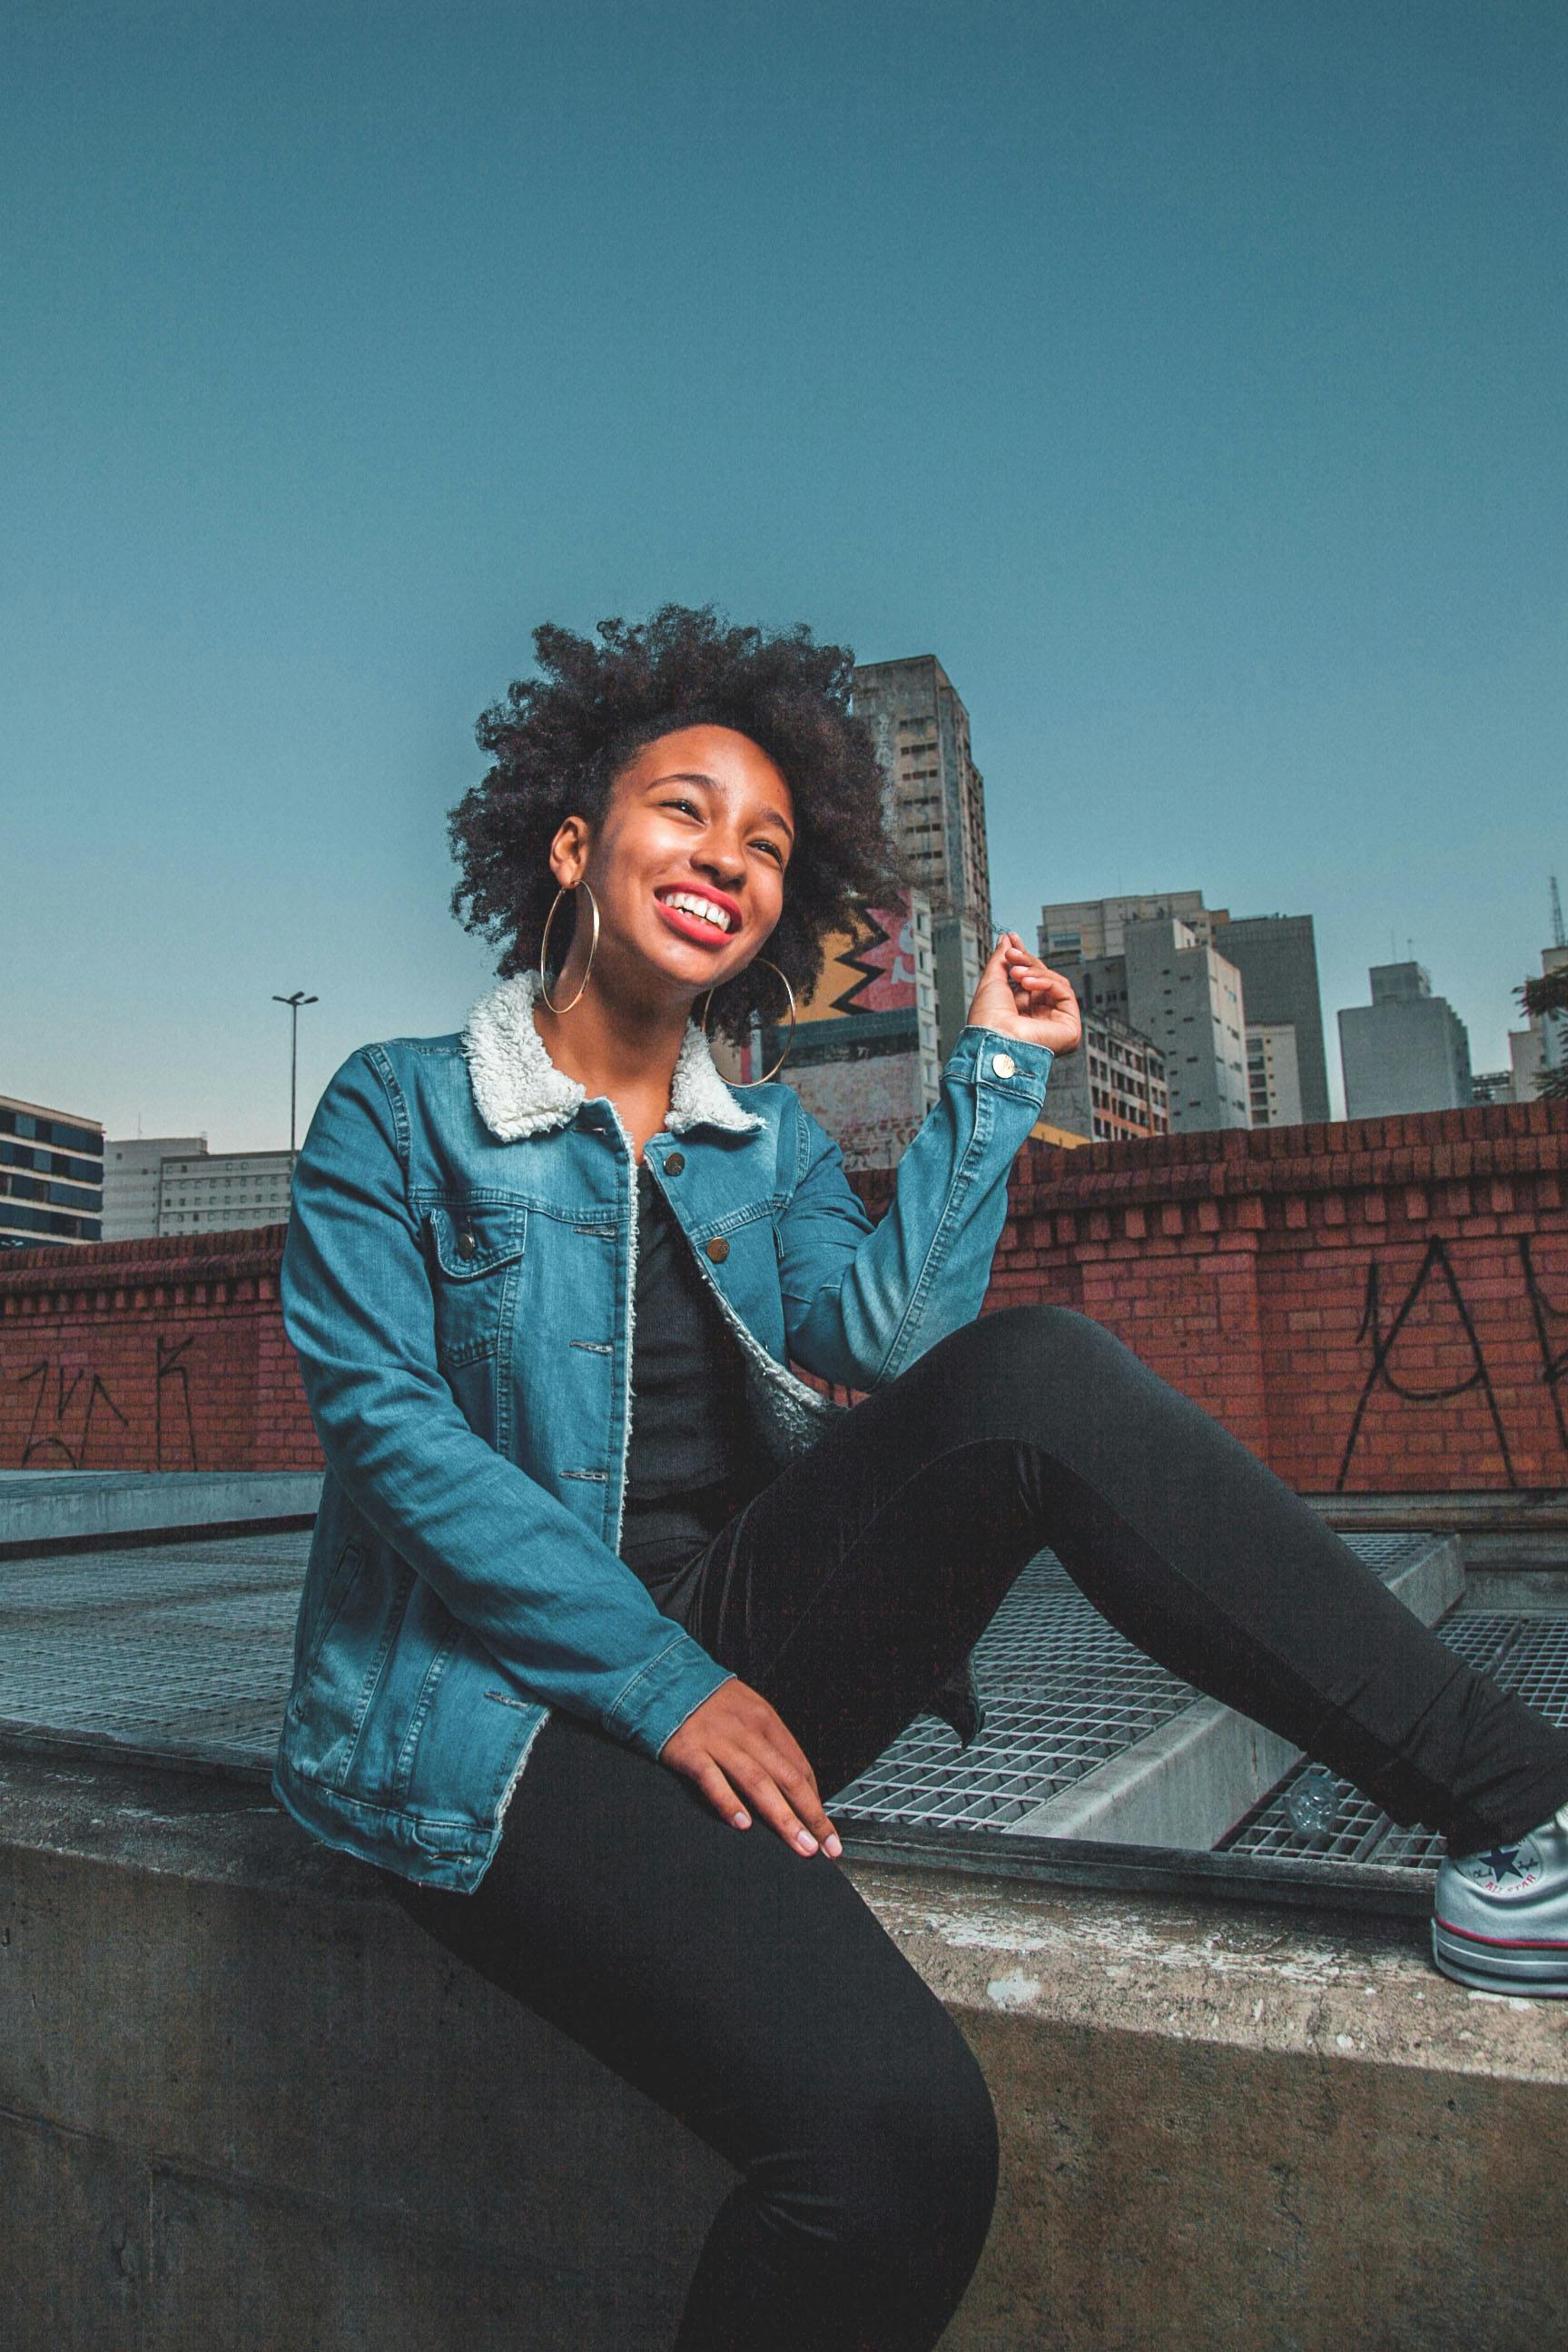 Woman in Blue Denim Jacket and Black Pants Smiling · Free Stock Photo